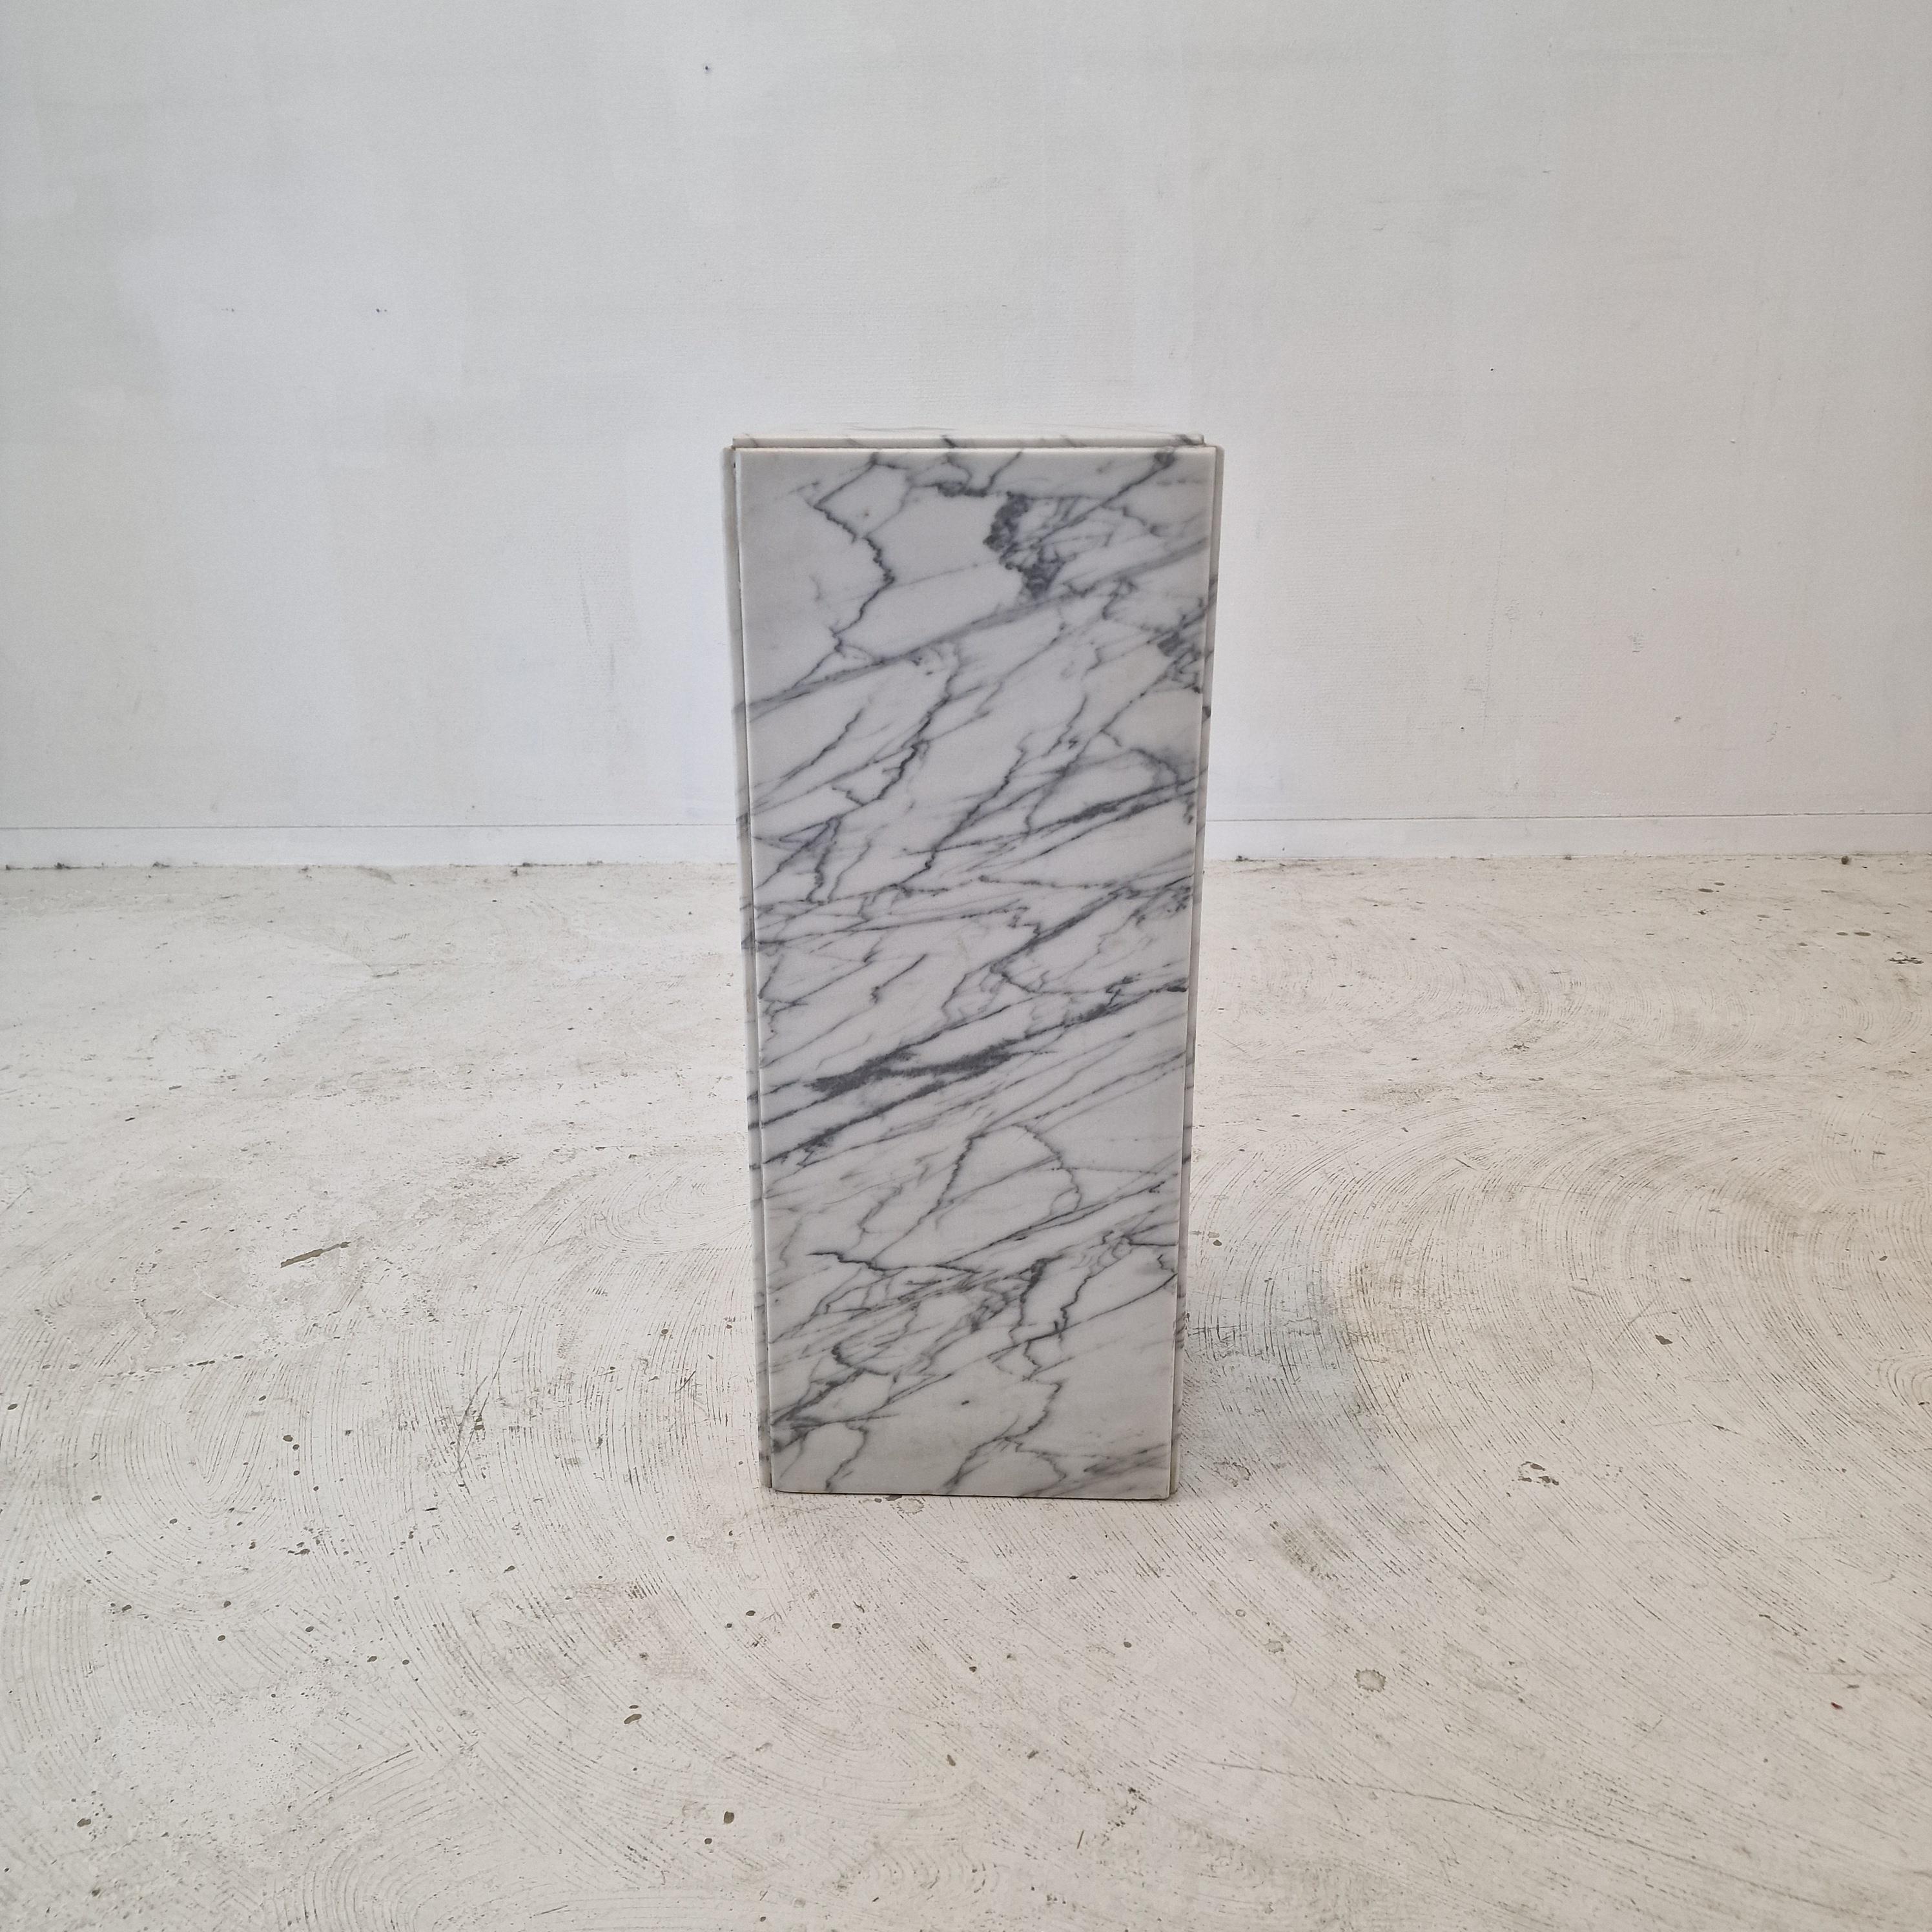 Italian pedestal, handcrafted out of Carrara marble, fabricated in the 1970s.
It can be used inside or outside the house.

It is made of beautiful marble.
Please take notice of the very nice patterns.

It has the normal traces of use, see the